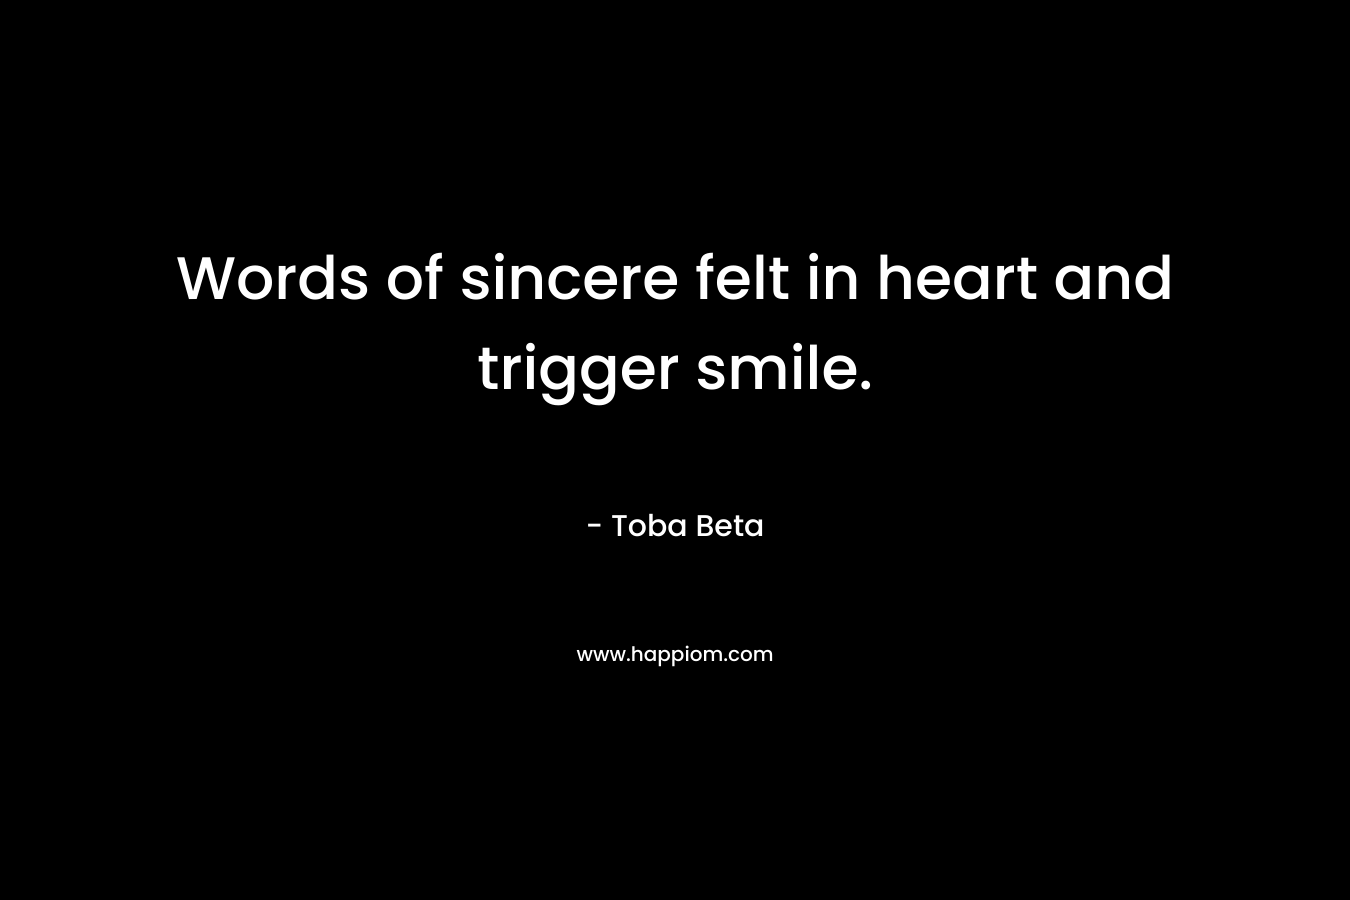 Words of sincere felt in heart and trigger smile. – Toba Beta